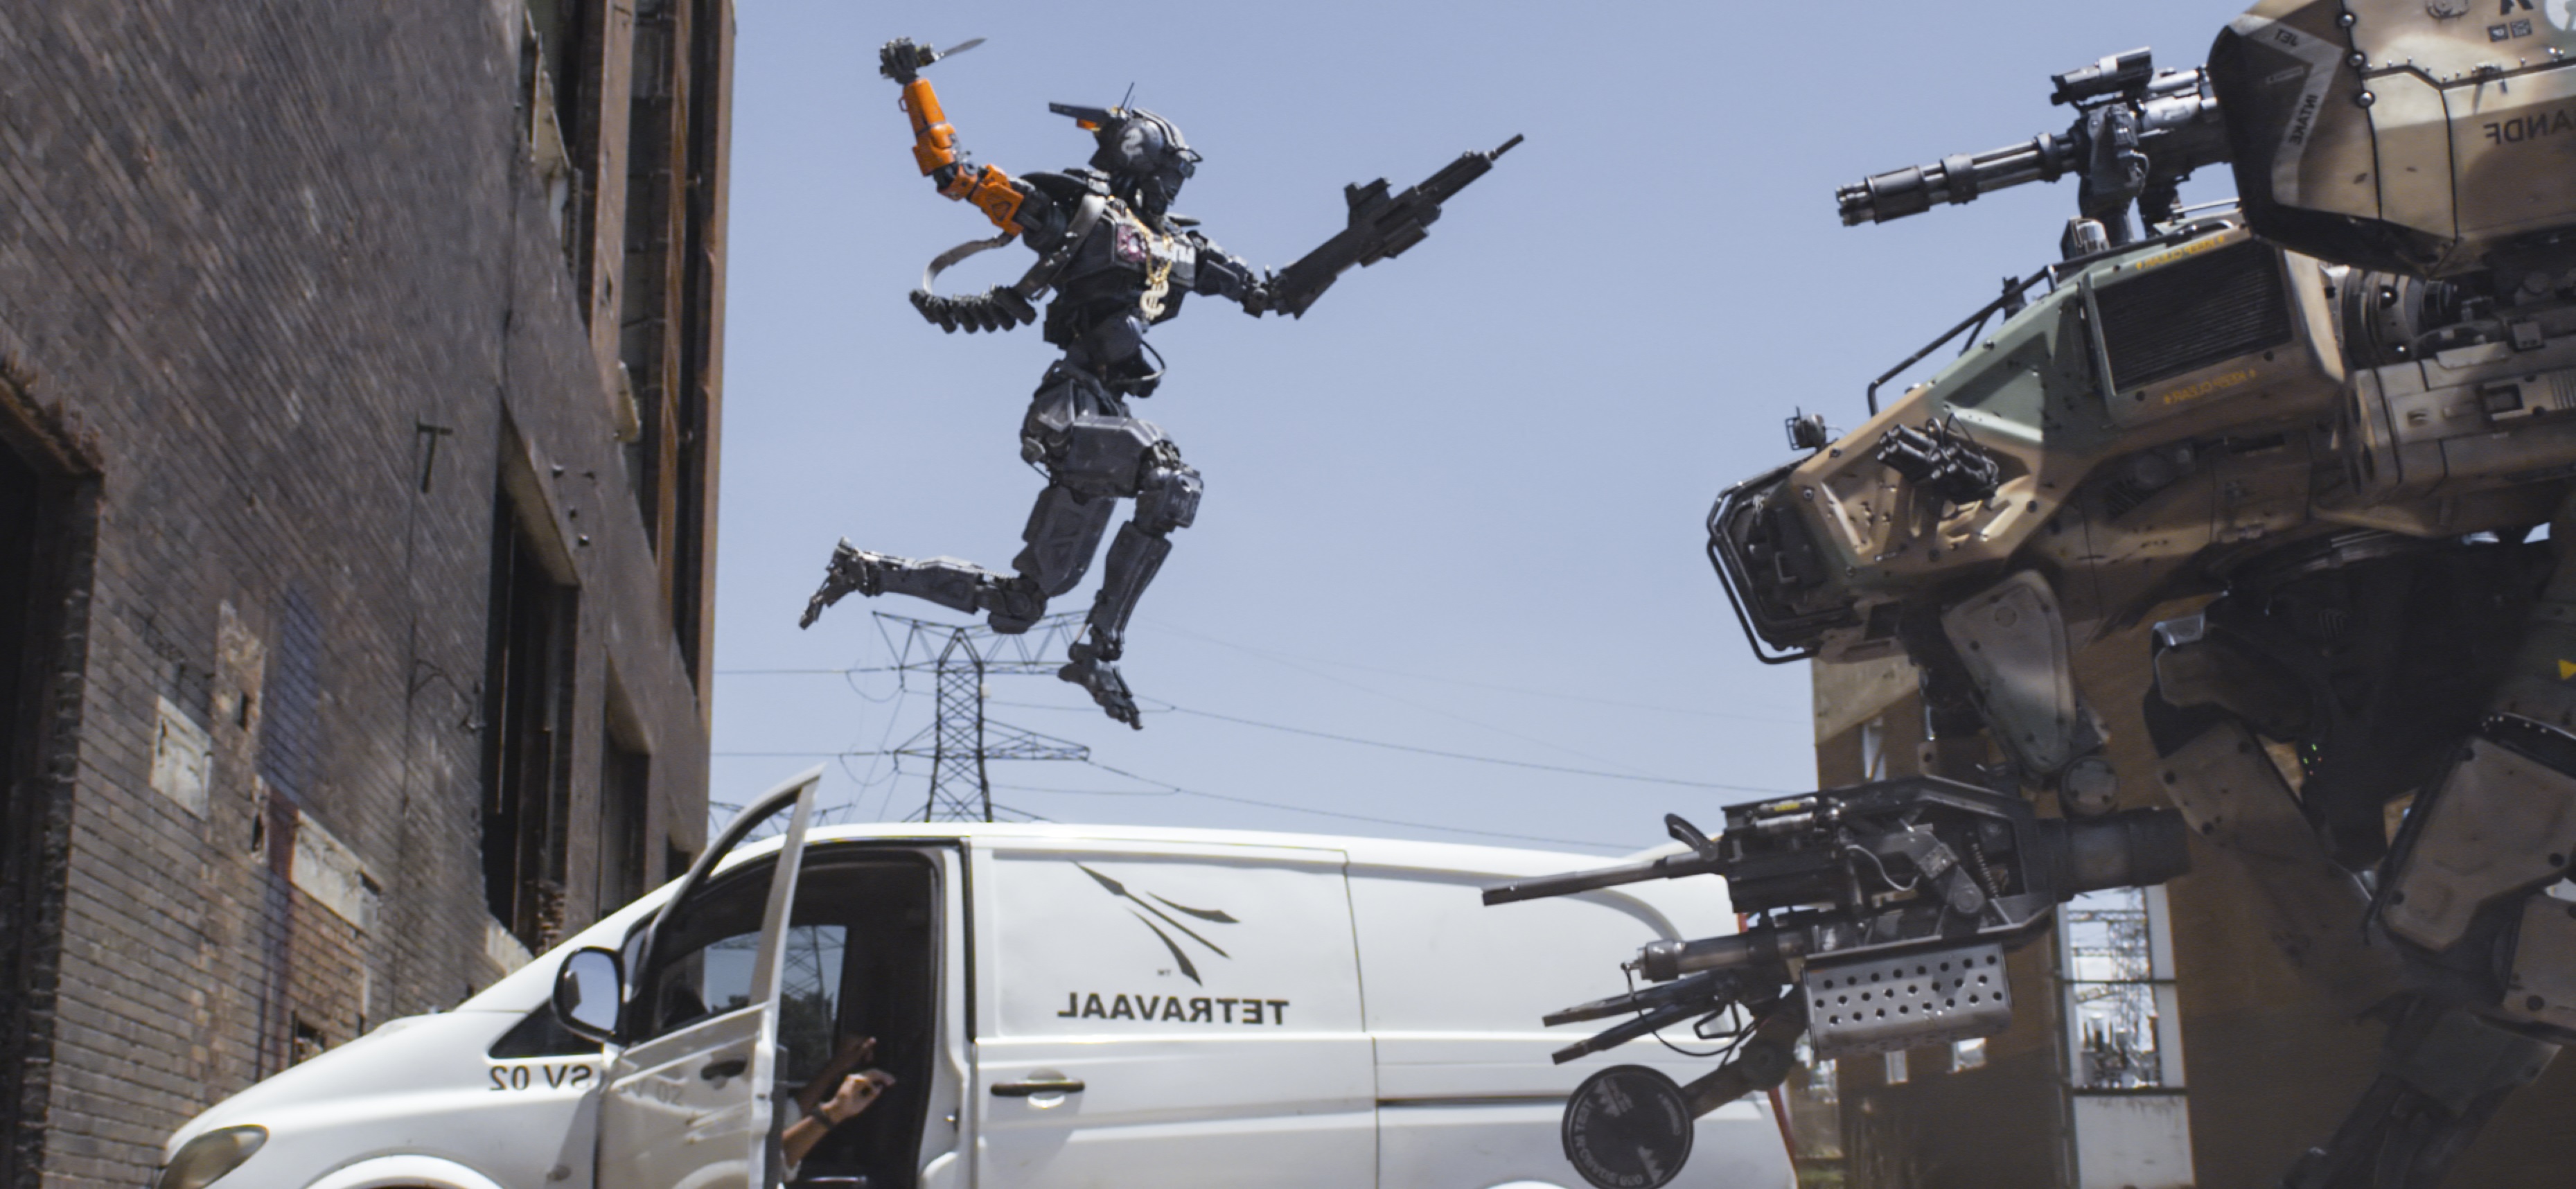 Chappie Wallpaper And Background Image